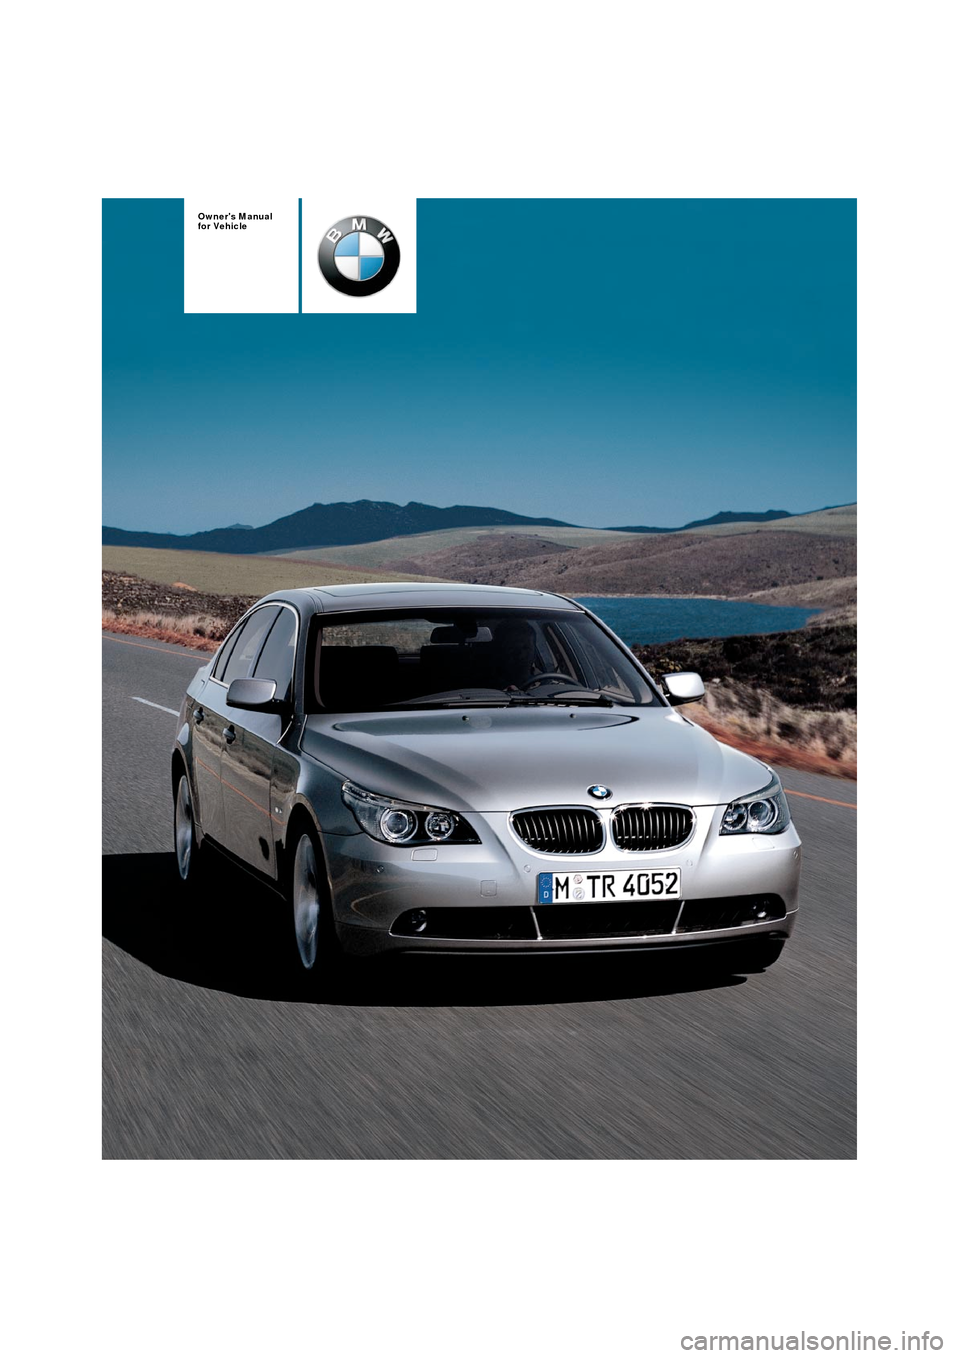 BMW 525I SEDAN 2004 E60 Owners Manual  
Owners Manual
for Vehicle 